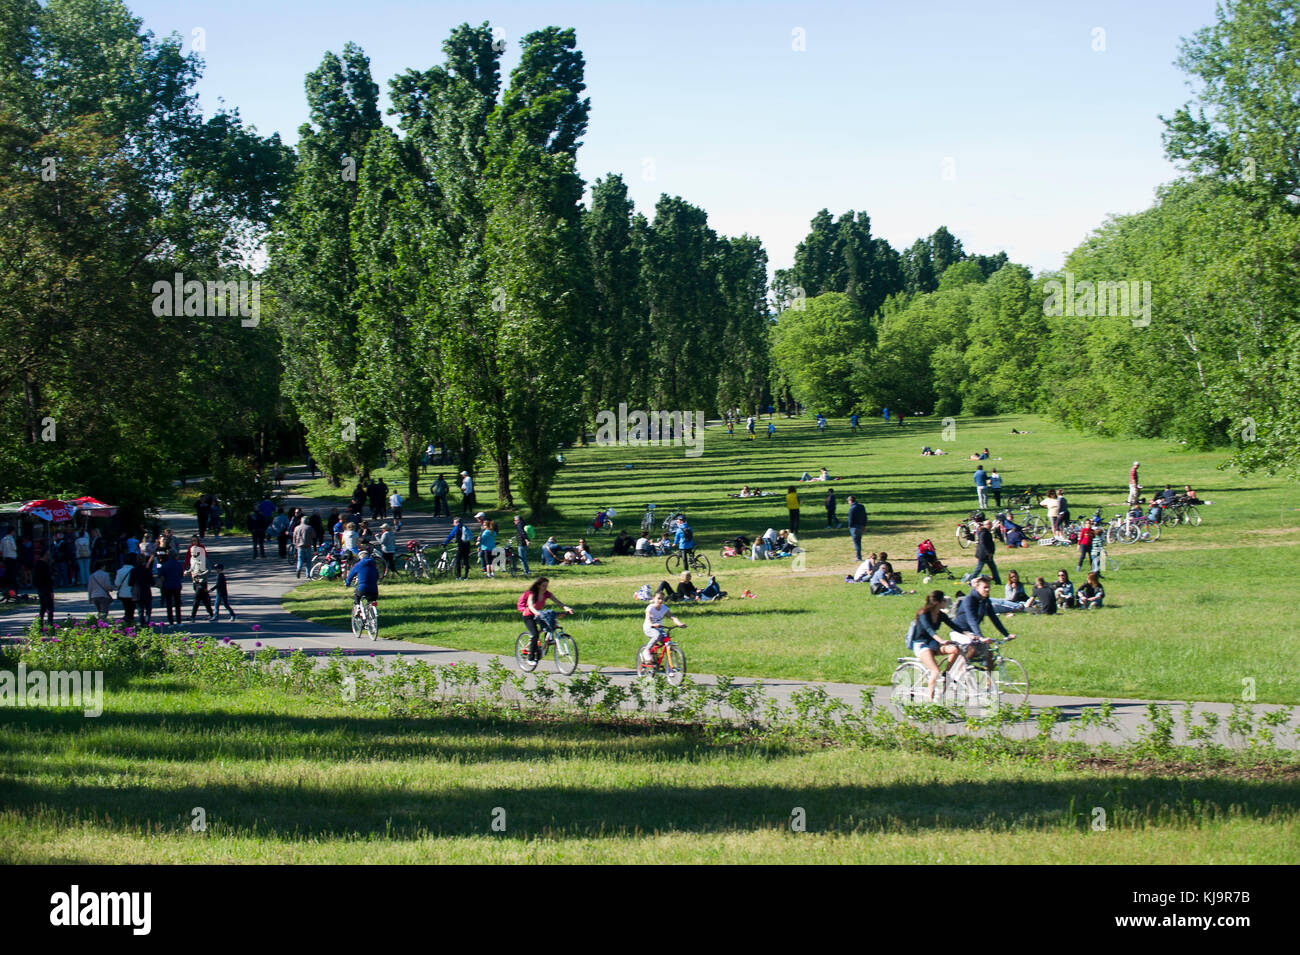 Parco Nord Milano is a metropolitan suburban park located on the northern outskirts of Milan. Classified as regional, it stretches between the towns of Milan, Bresso, Cusano Milanino, Cormano, Cinisello Balsamo, Sesto San Giovanni. Stock Photo